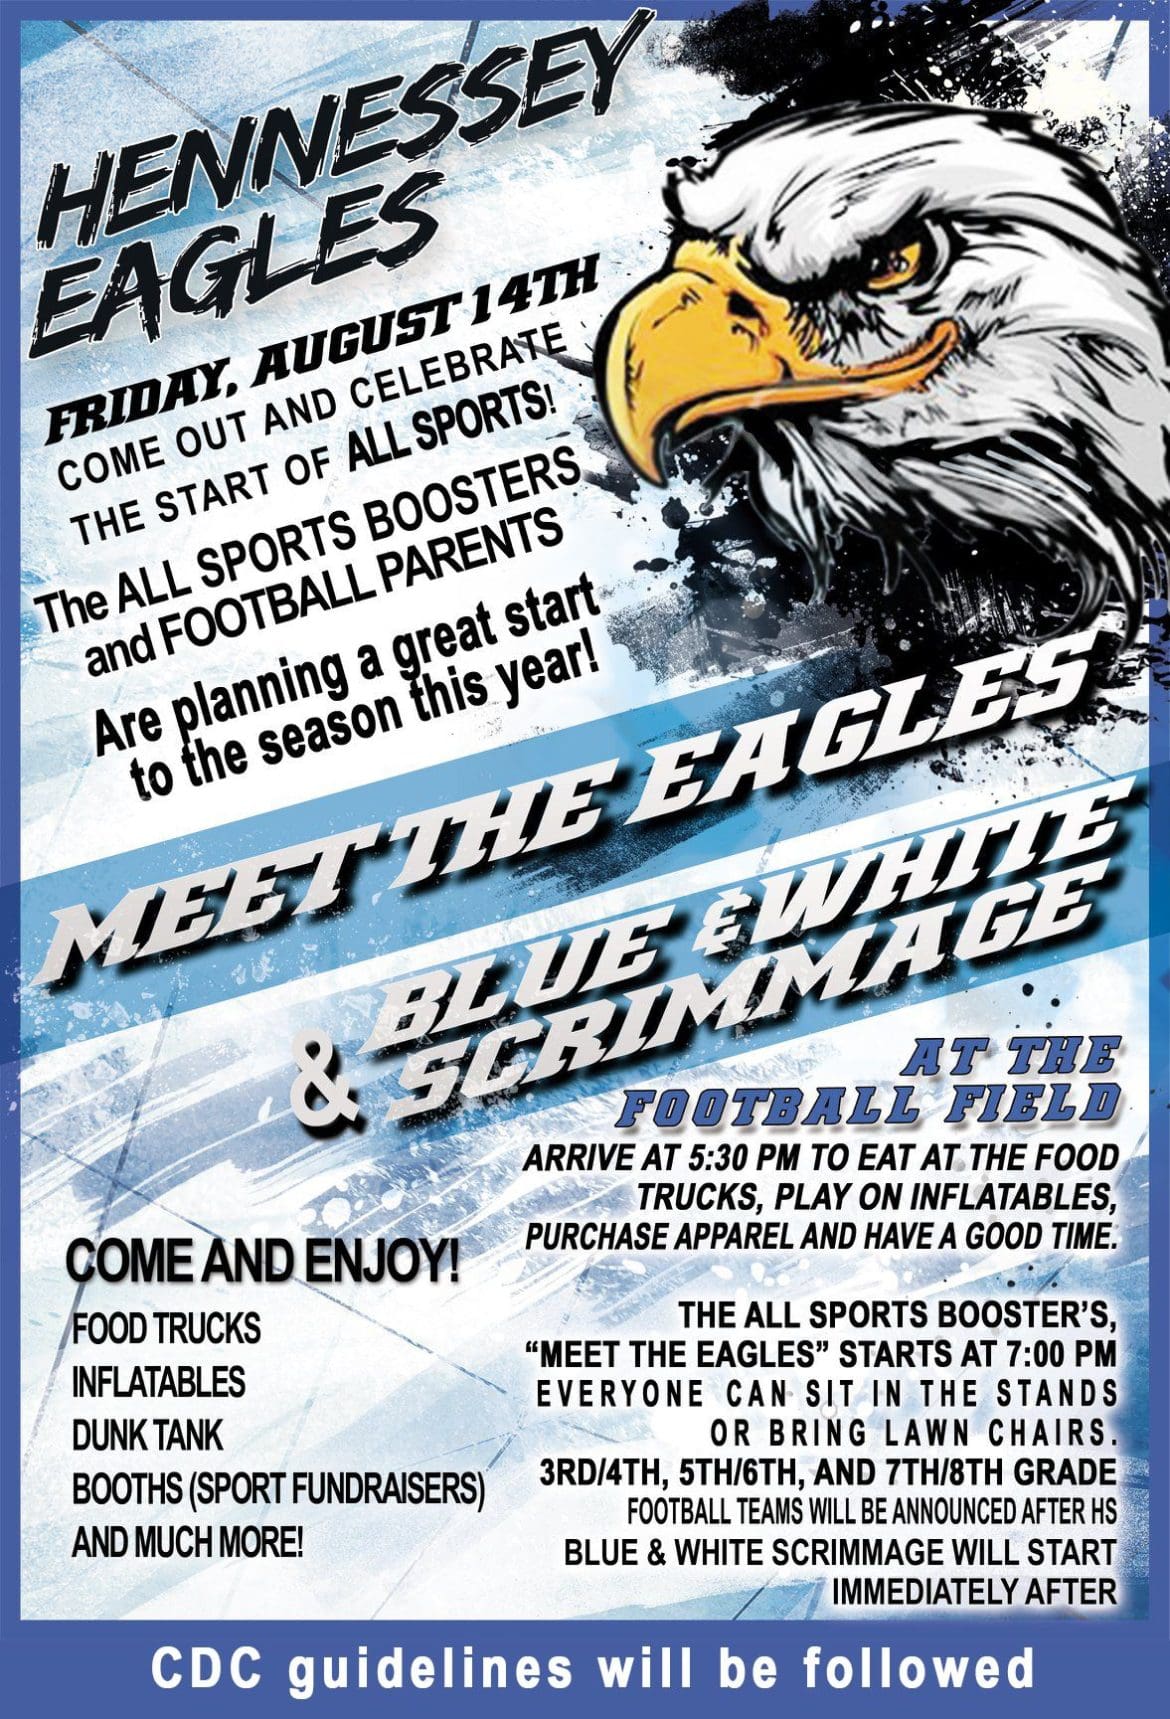 MEET THE EAGLES AND BLUE/WHITE SCRIMMAGE